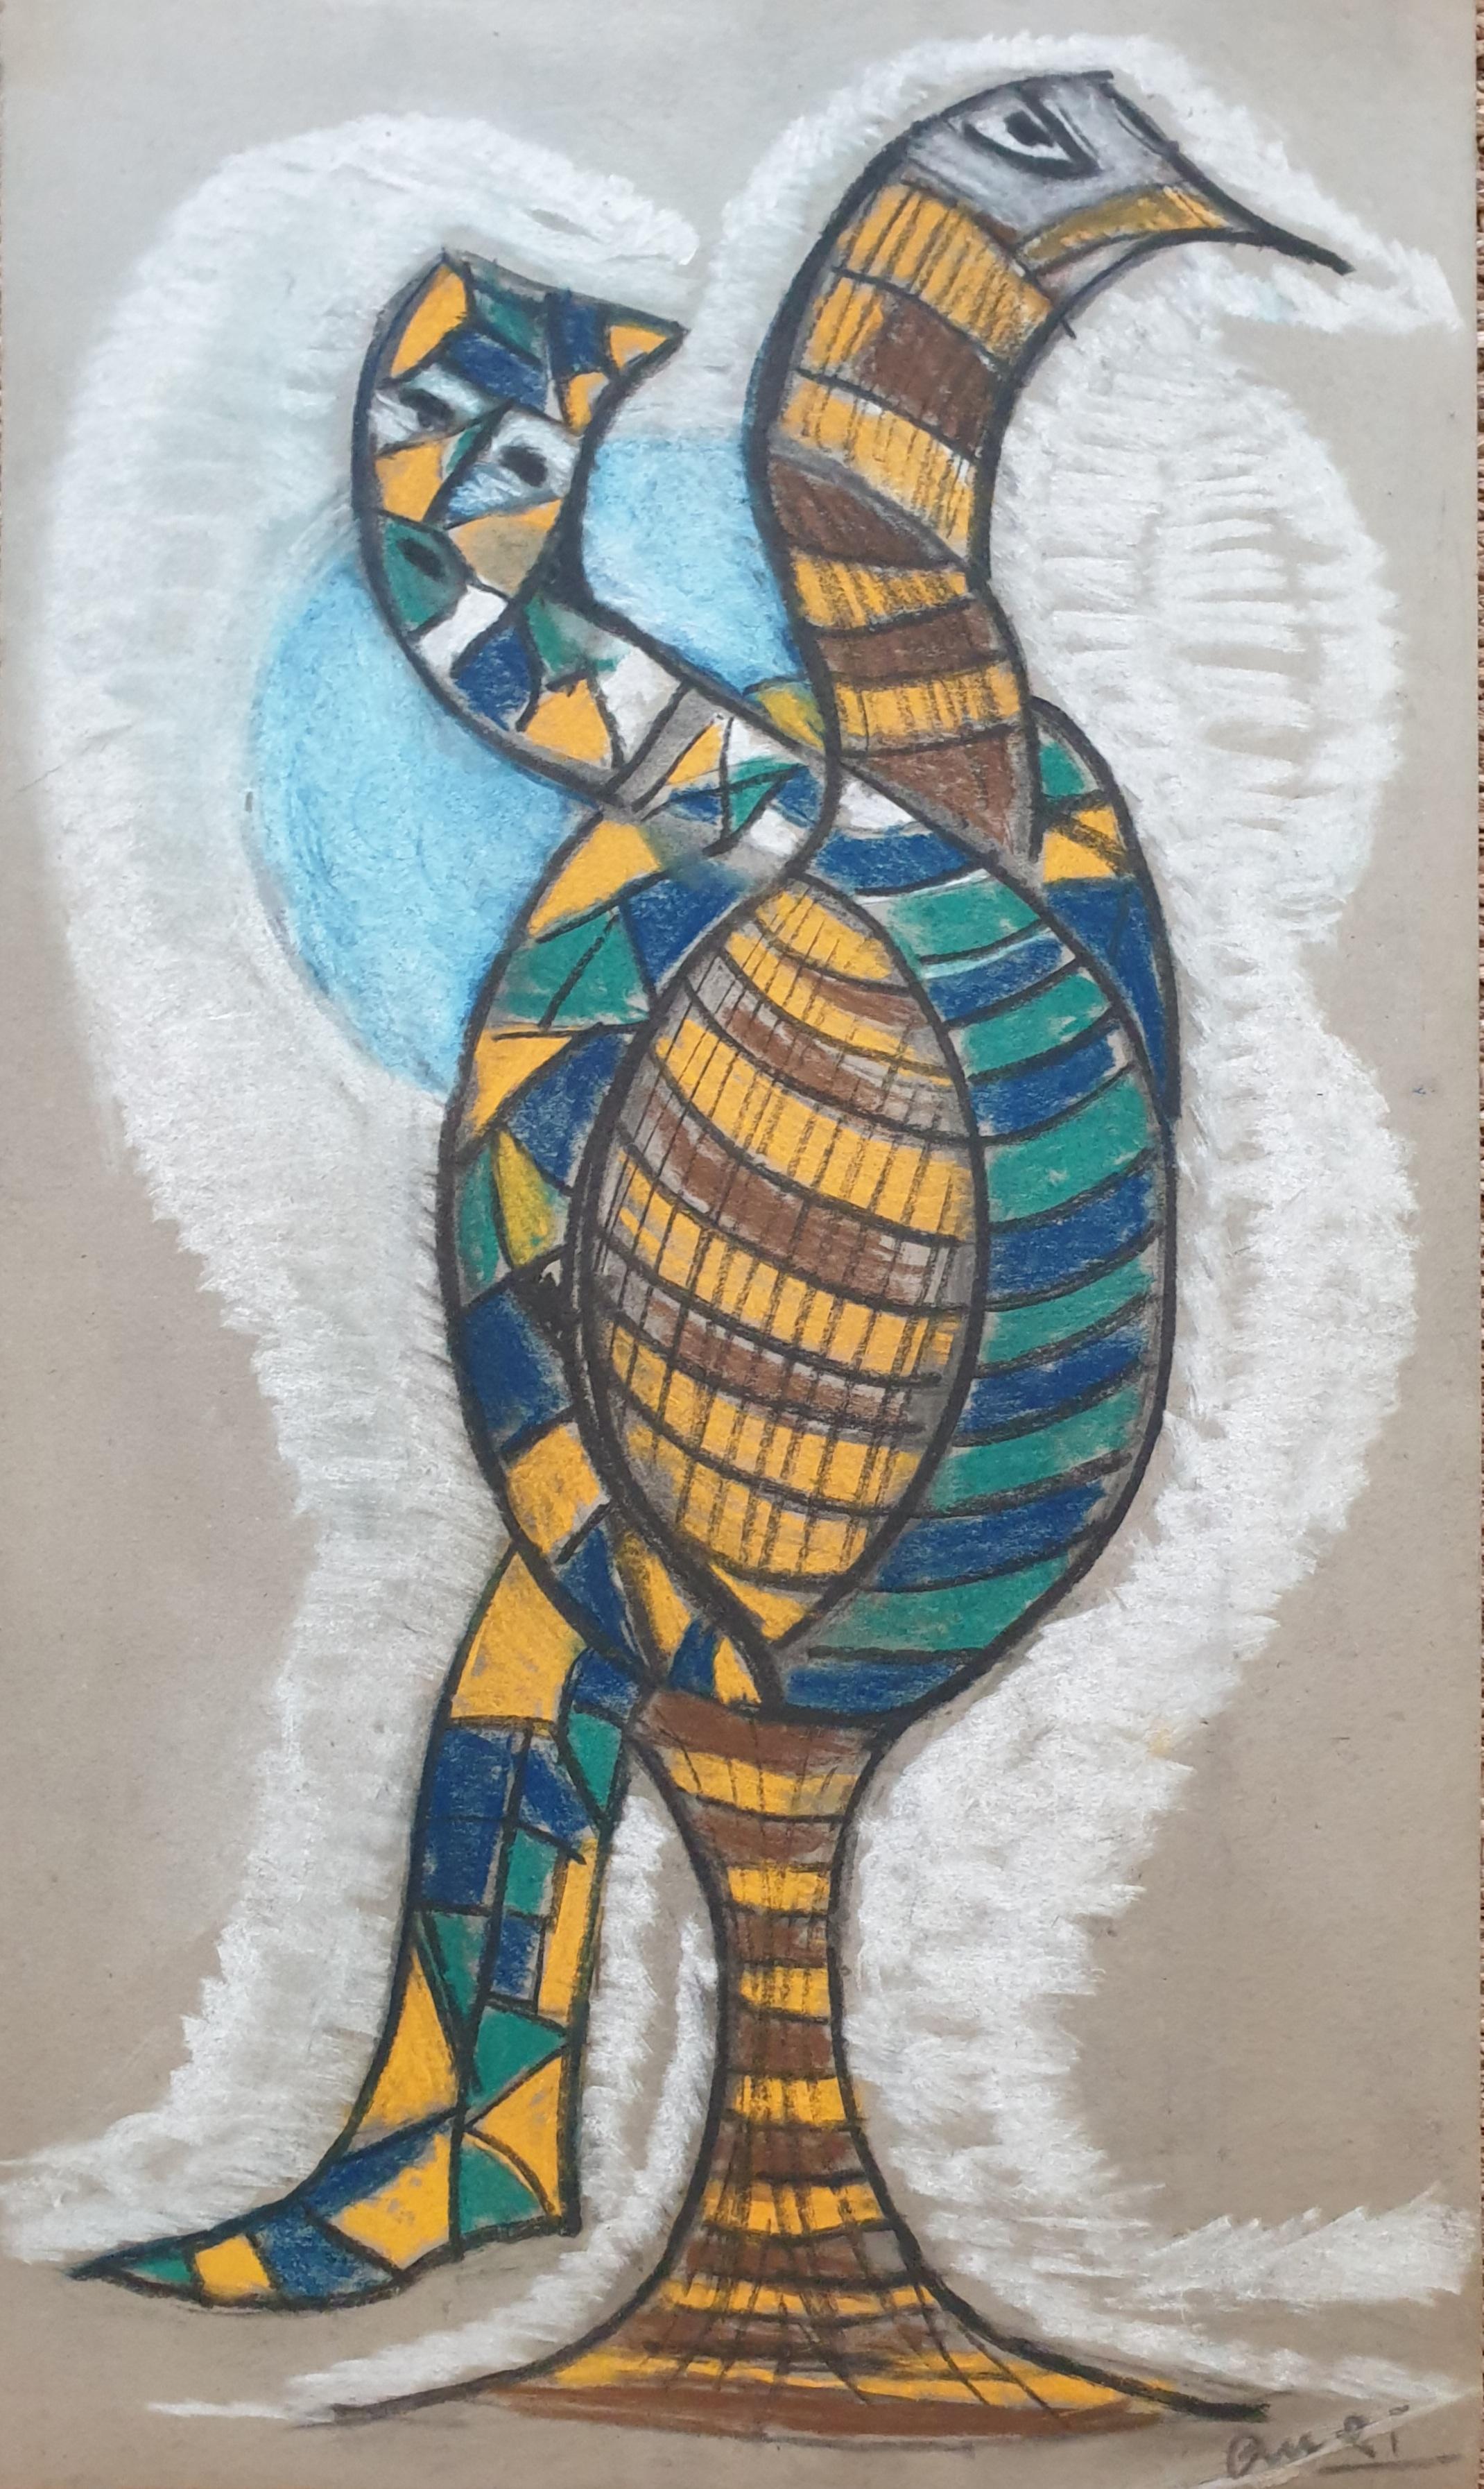 A Nuchy Abstract Drawing - Abstract Expressionist CoBrA Style Anthropomorphic Bird. Chalk on Paper.